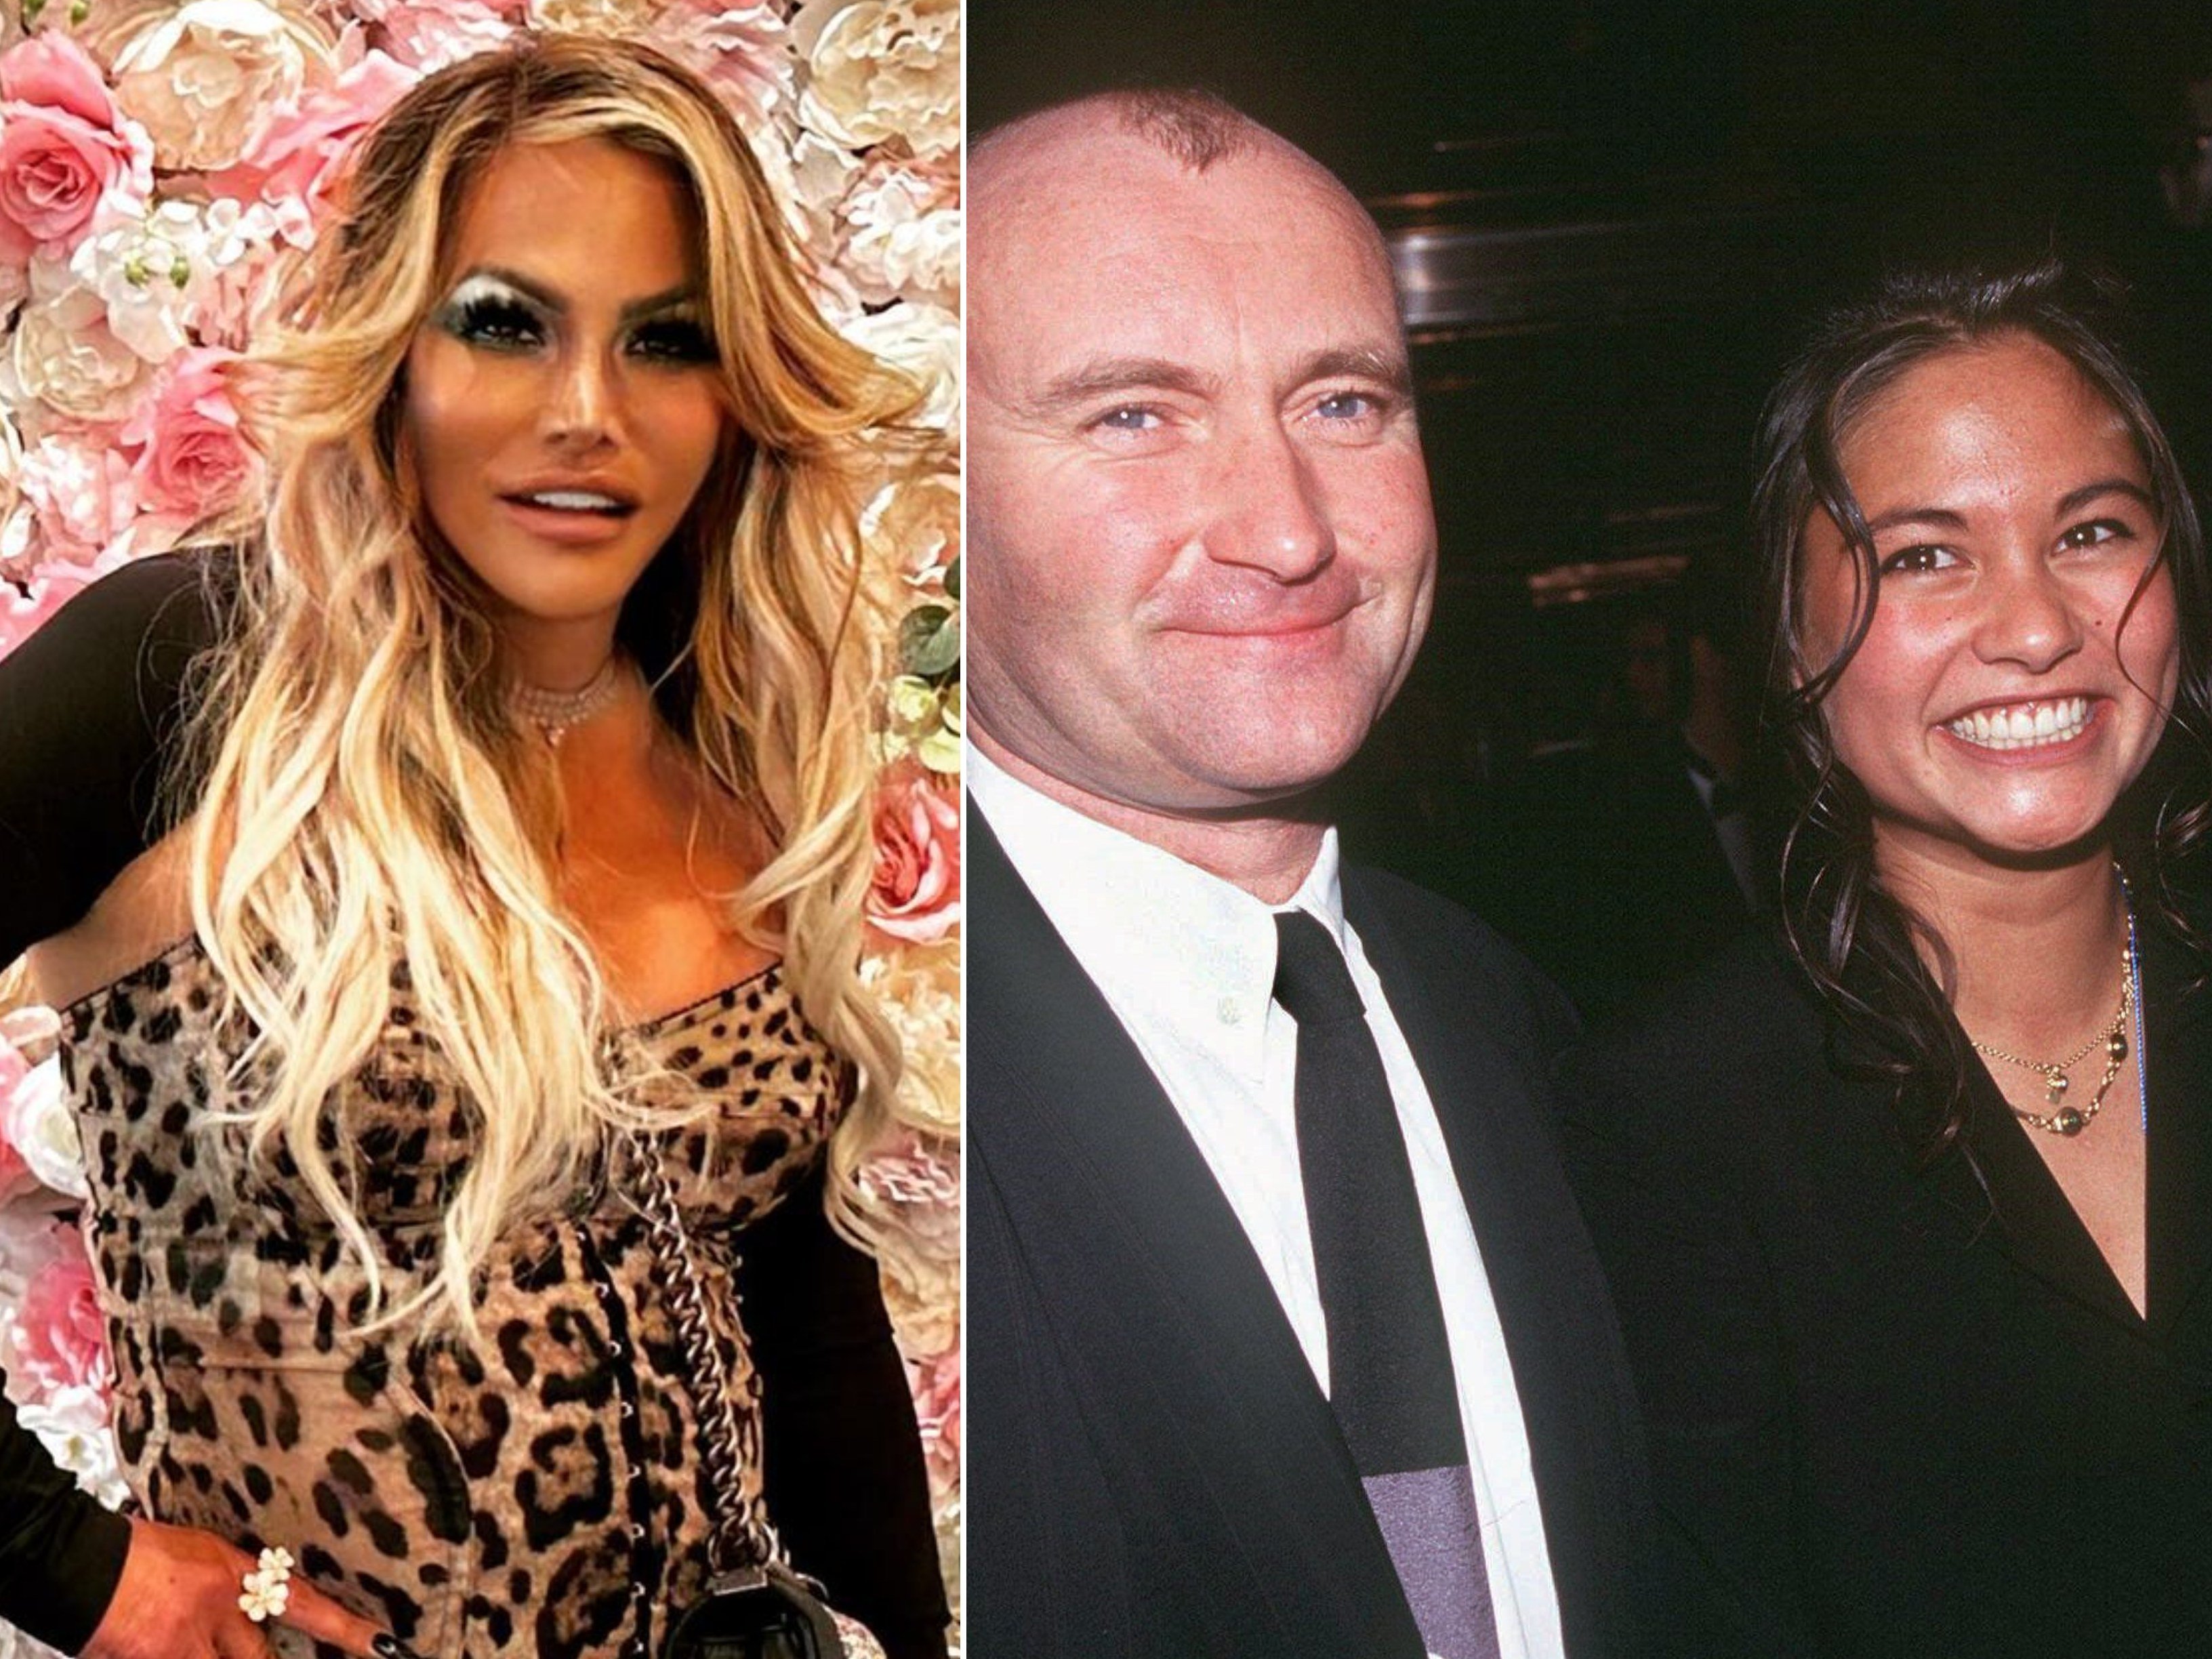 Who is Orianne Cevey, Phil Collins’ ex-wife? Photos: @ orianne_collins/Instagram, Reuters